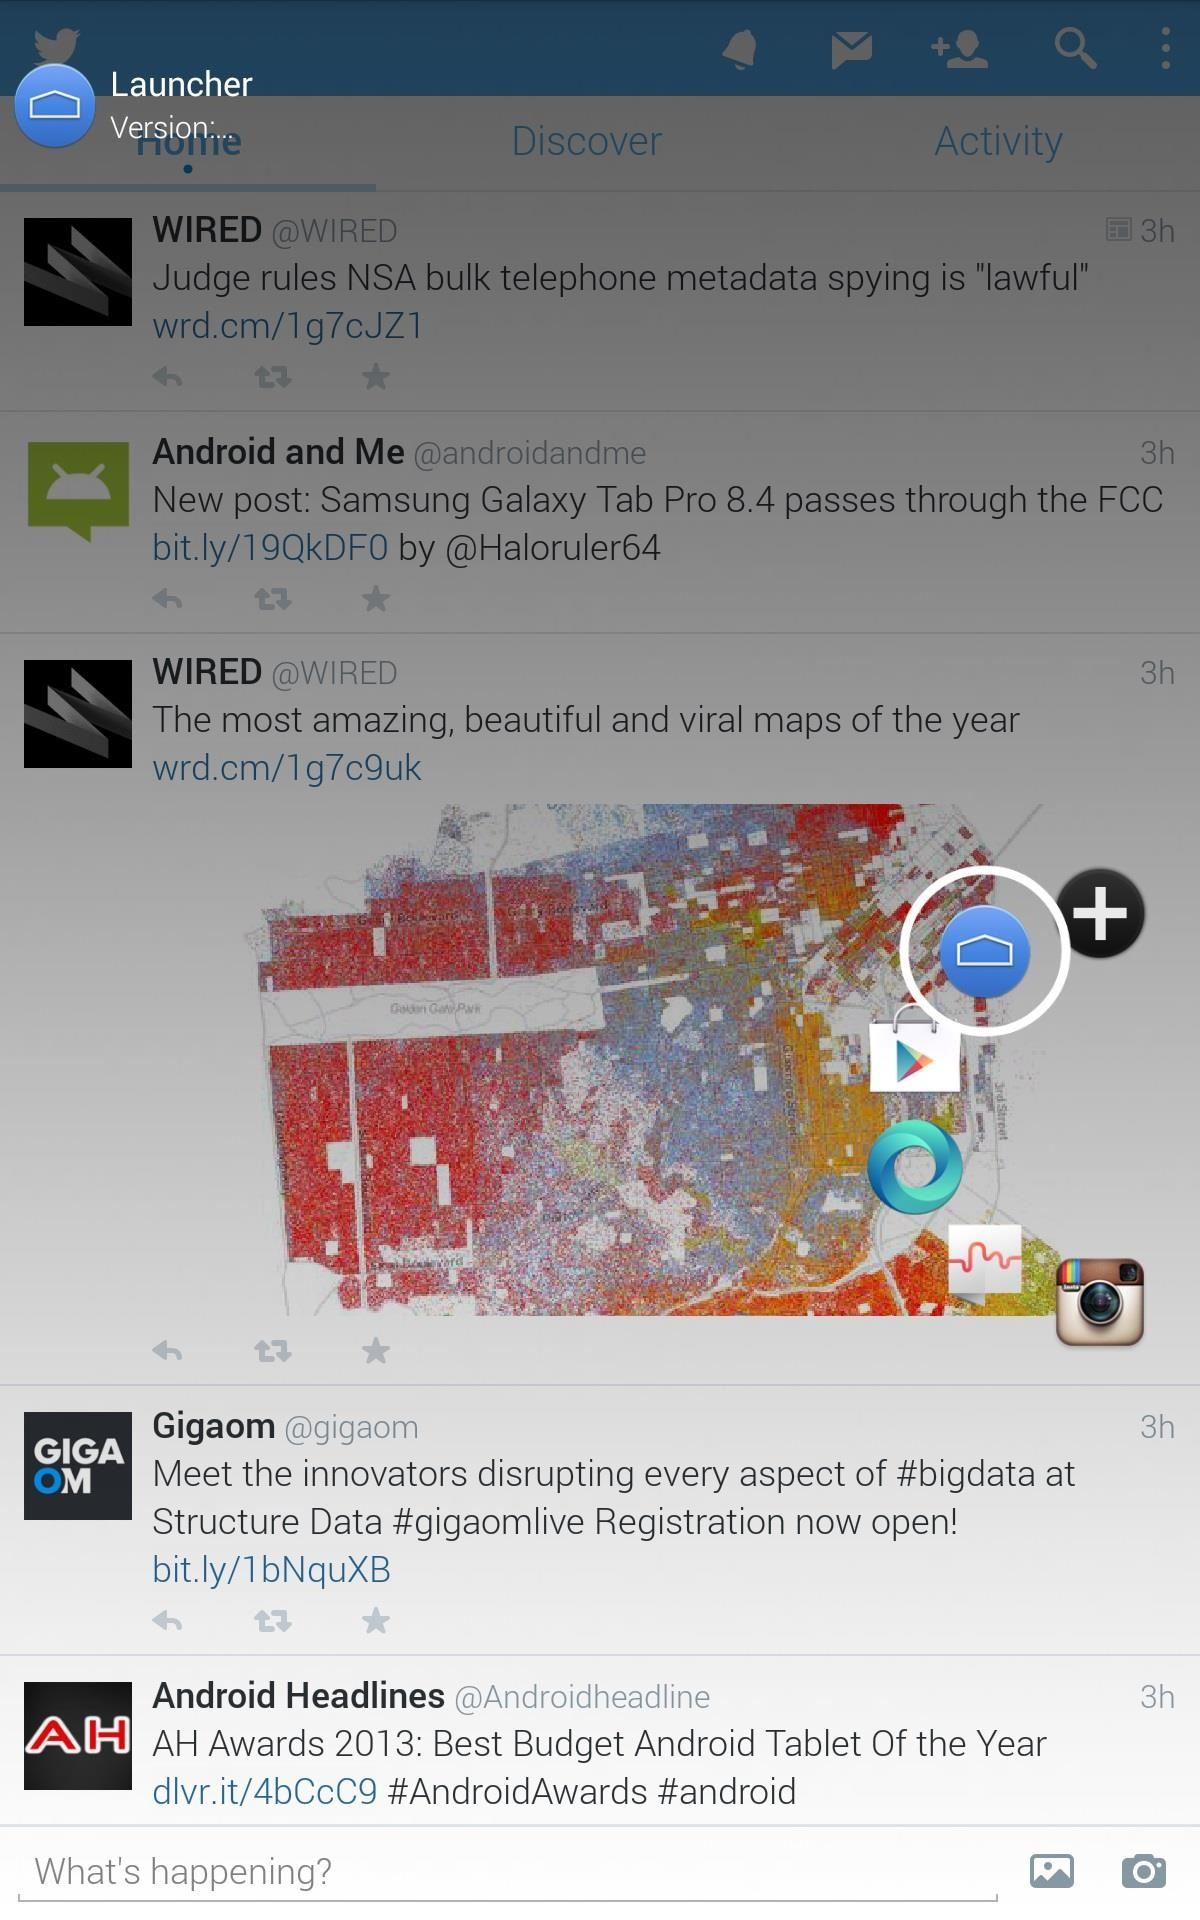 Multitask Faster: How to Switch Between Running Apps More Rapidly on Your Nexus 7 Tablet